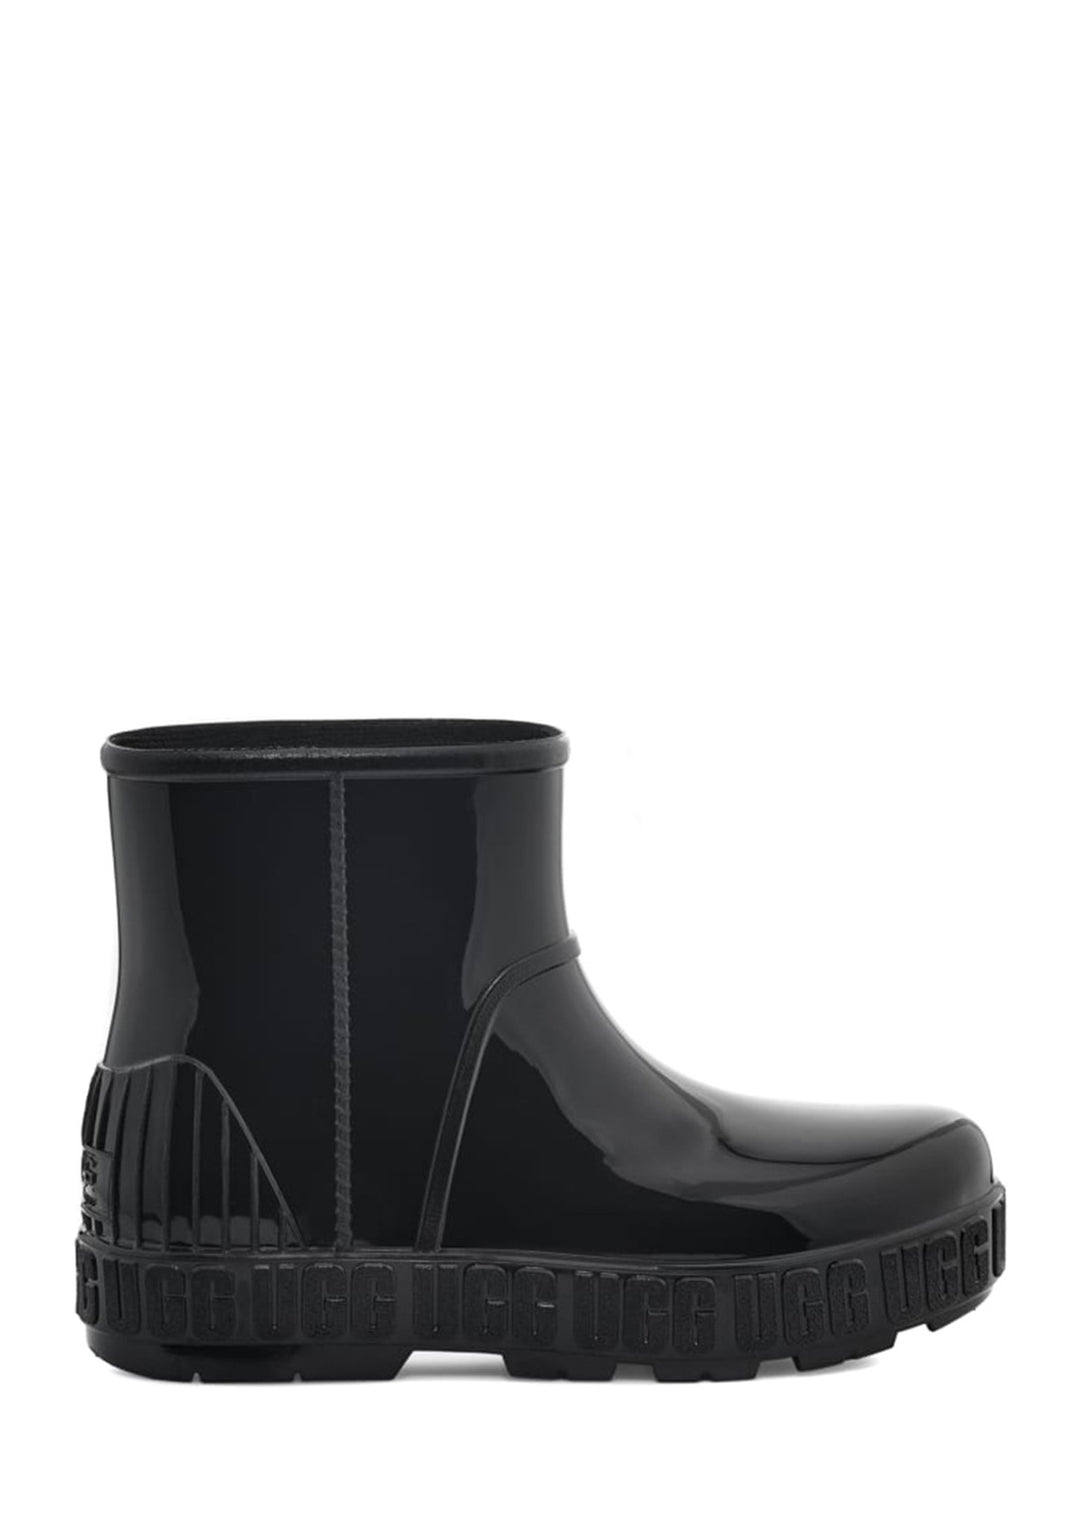 UGG - Black Women's Ankle Boot